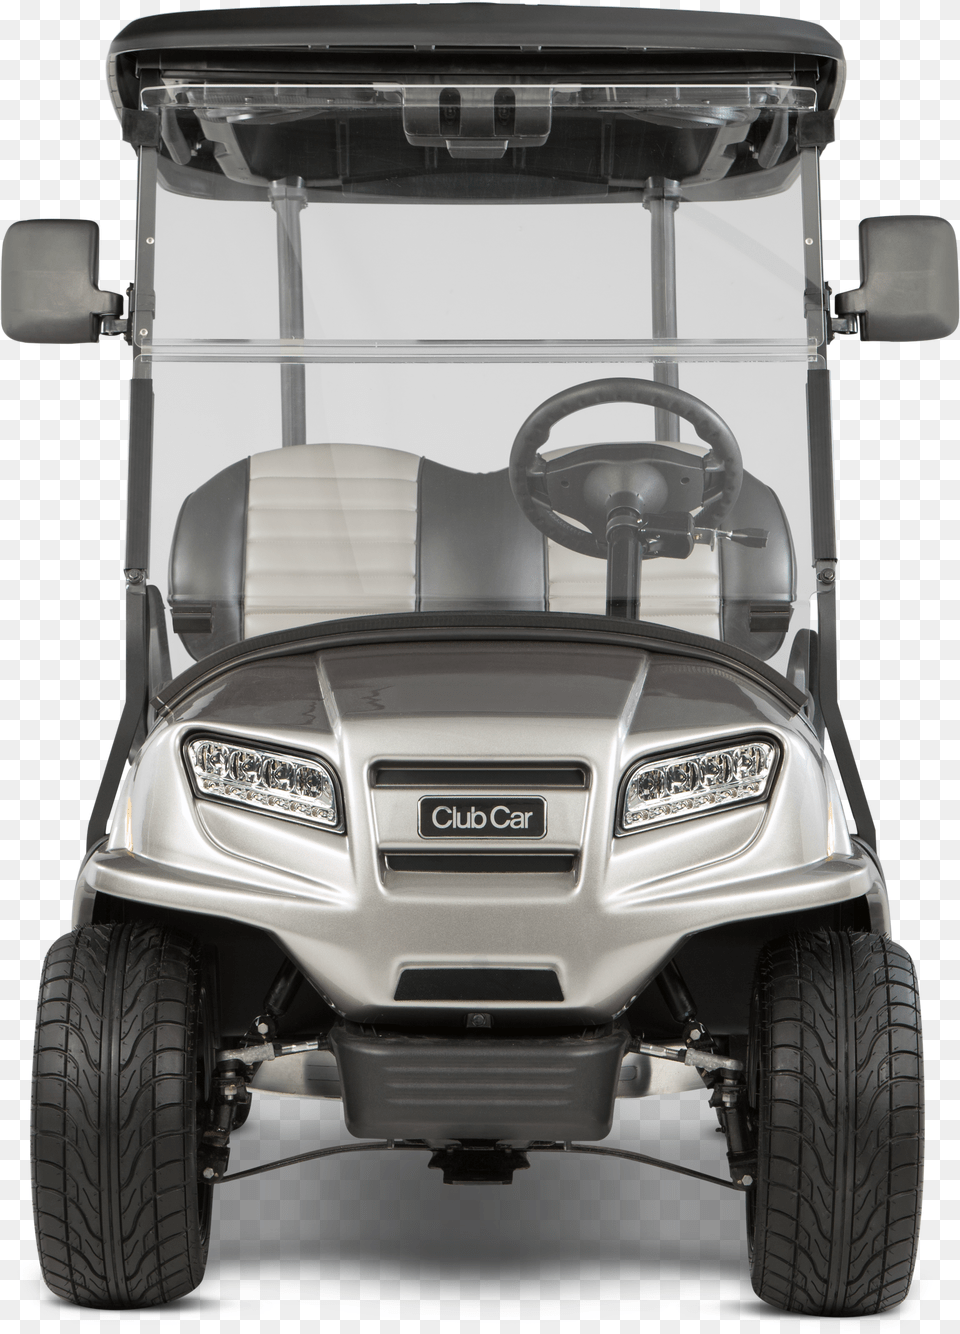 Personal Golf Cars Golf Cart Png Image